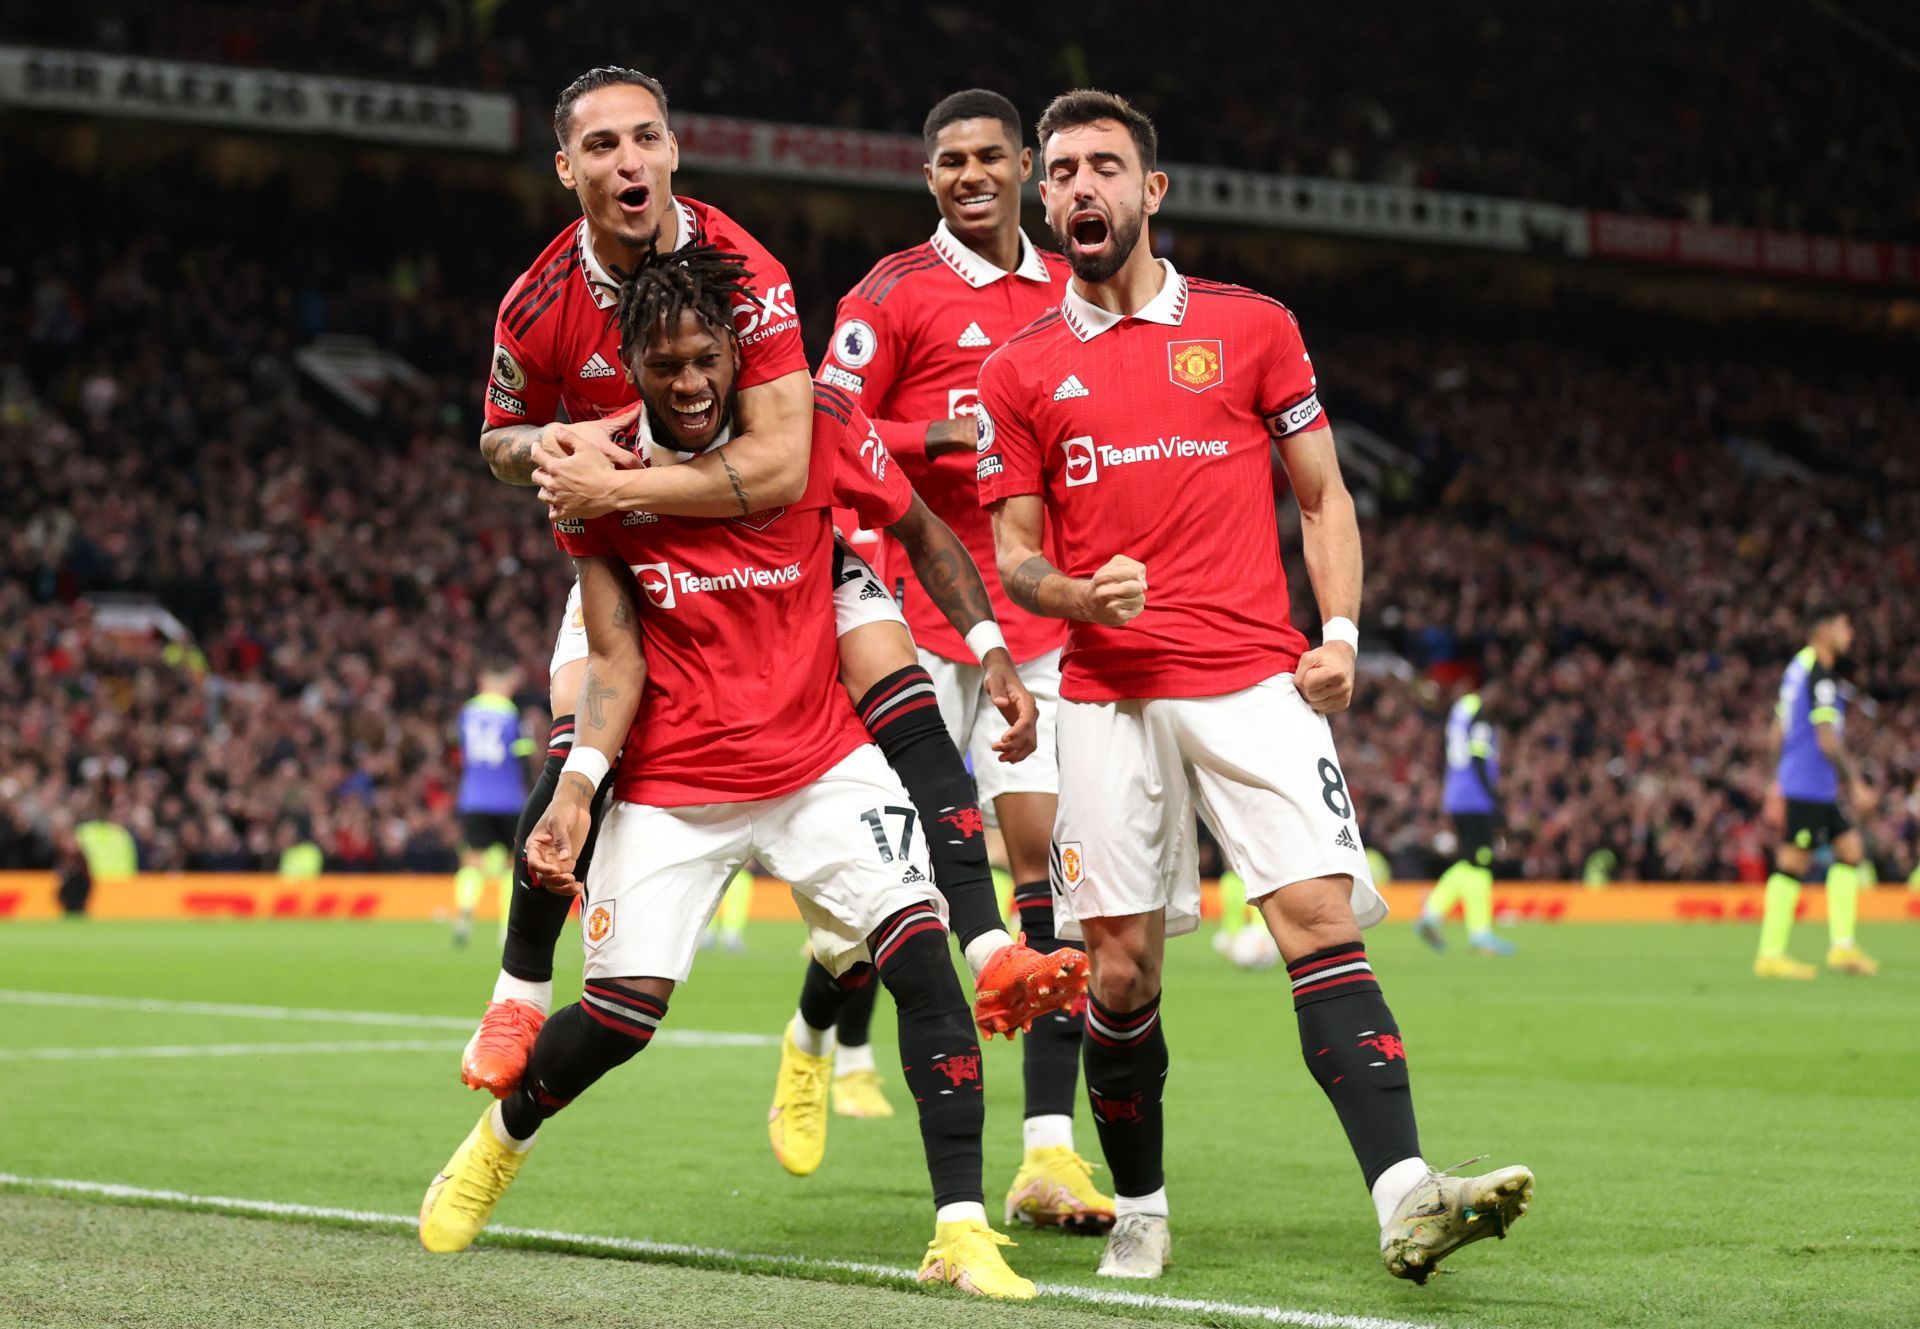 A brilliant night for the Red Devils